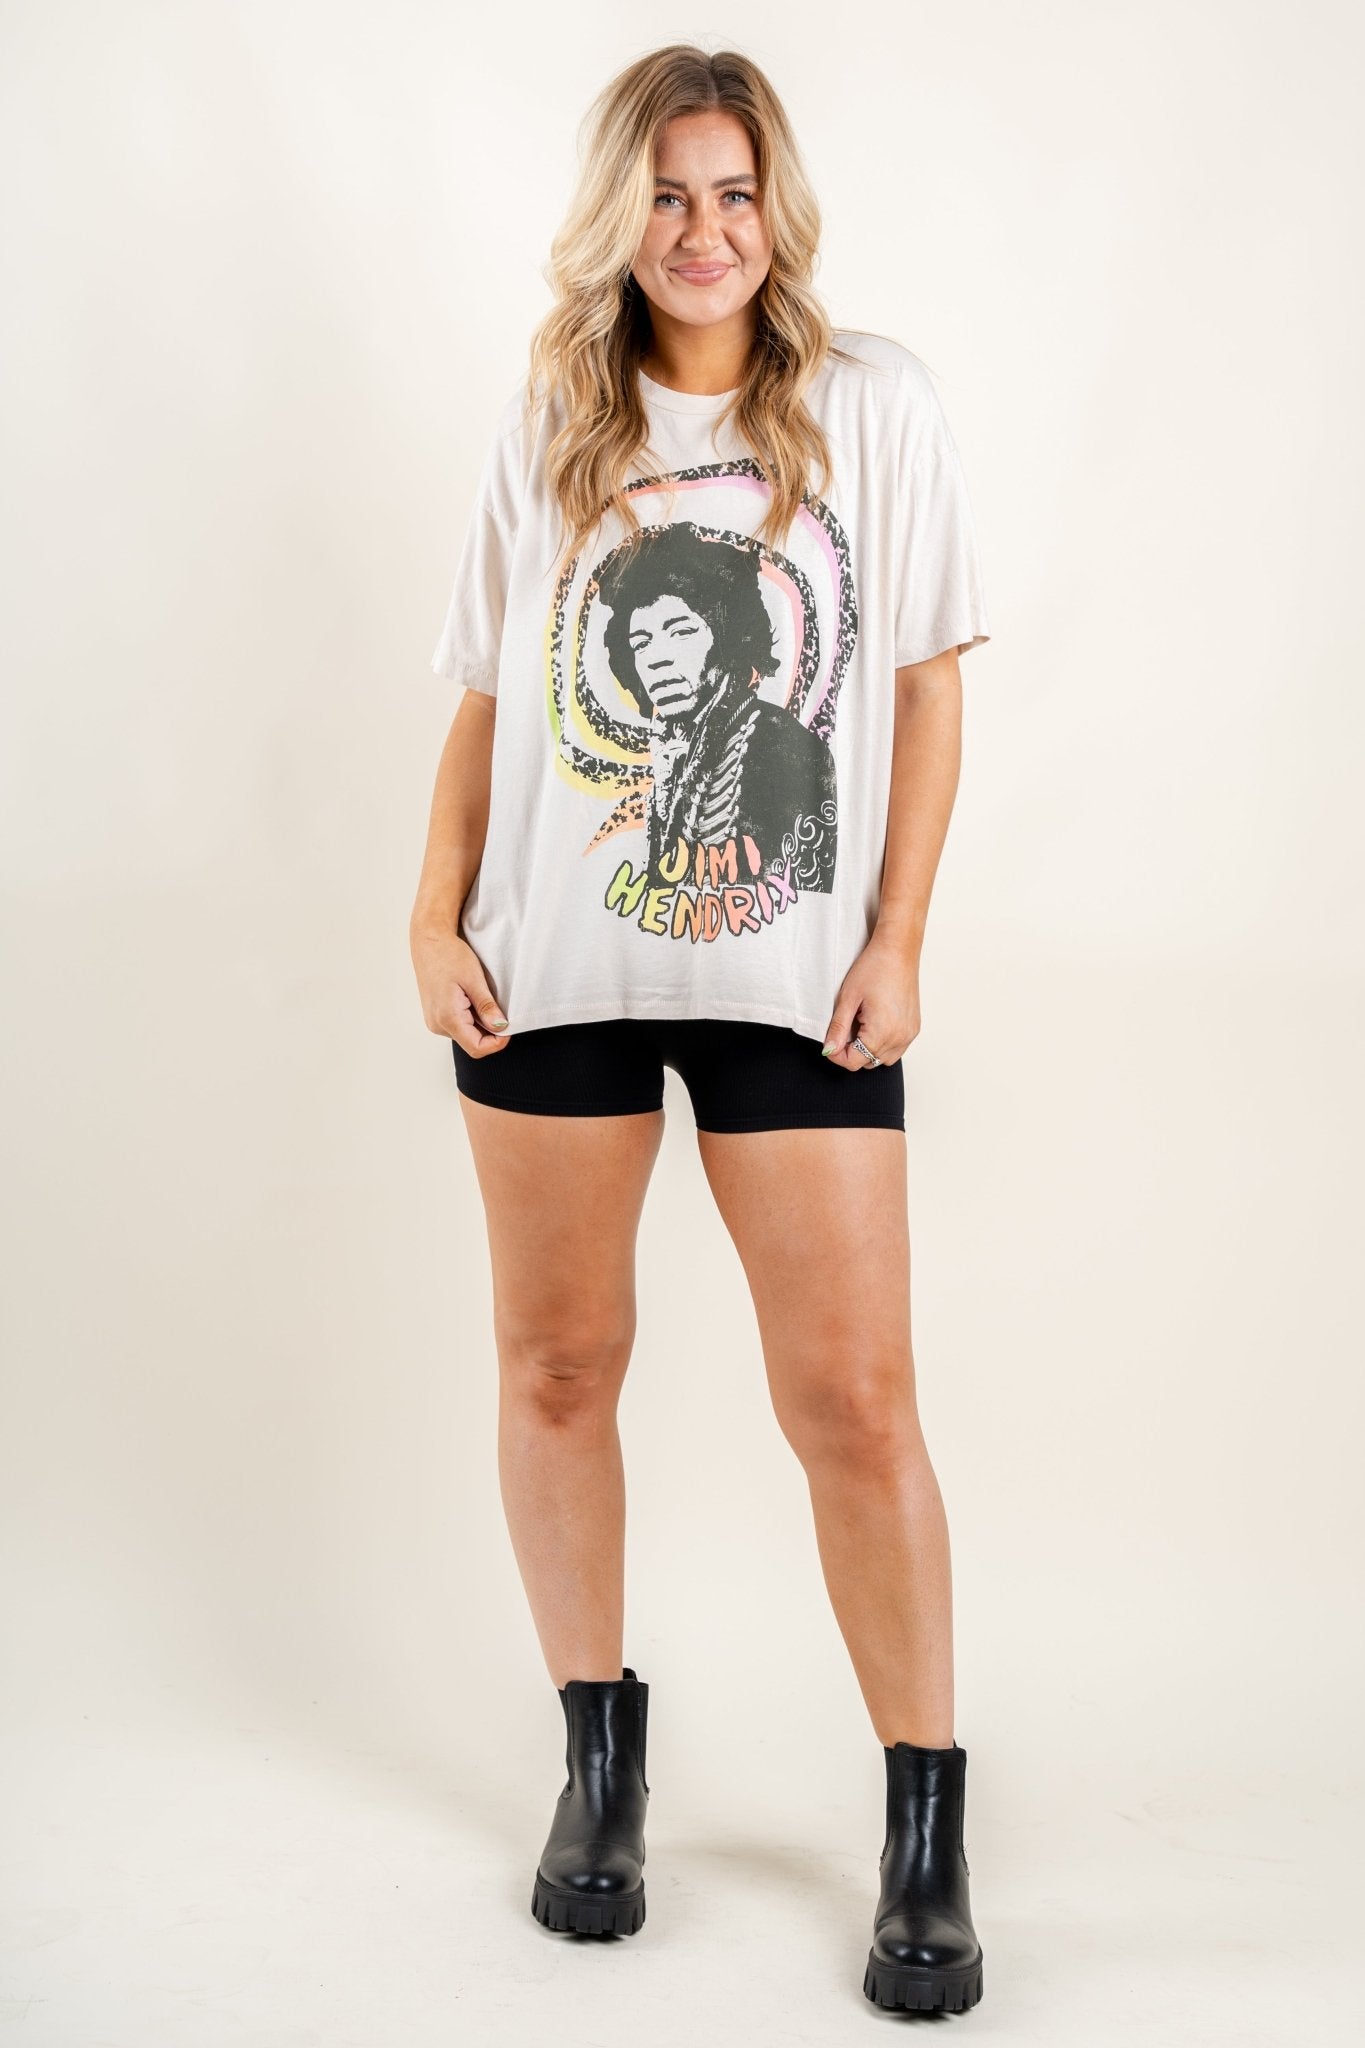 DayDreamer Jimi Hendrix spiral t-shirt dirty white - Vintage Band T-Shirts and Sweatshirts at Lush Fashion Lounge Boutique in Oklahoma City